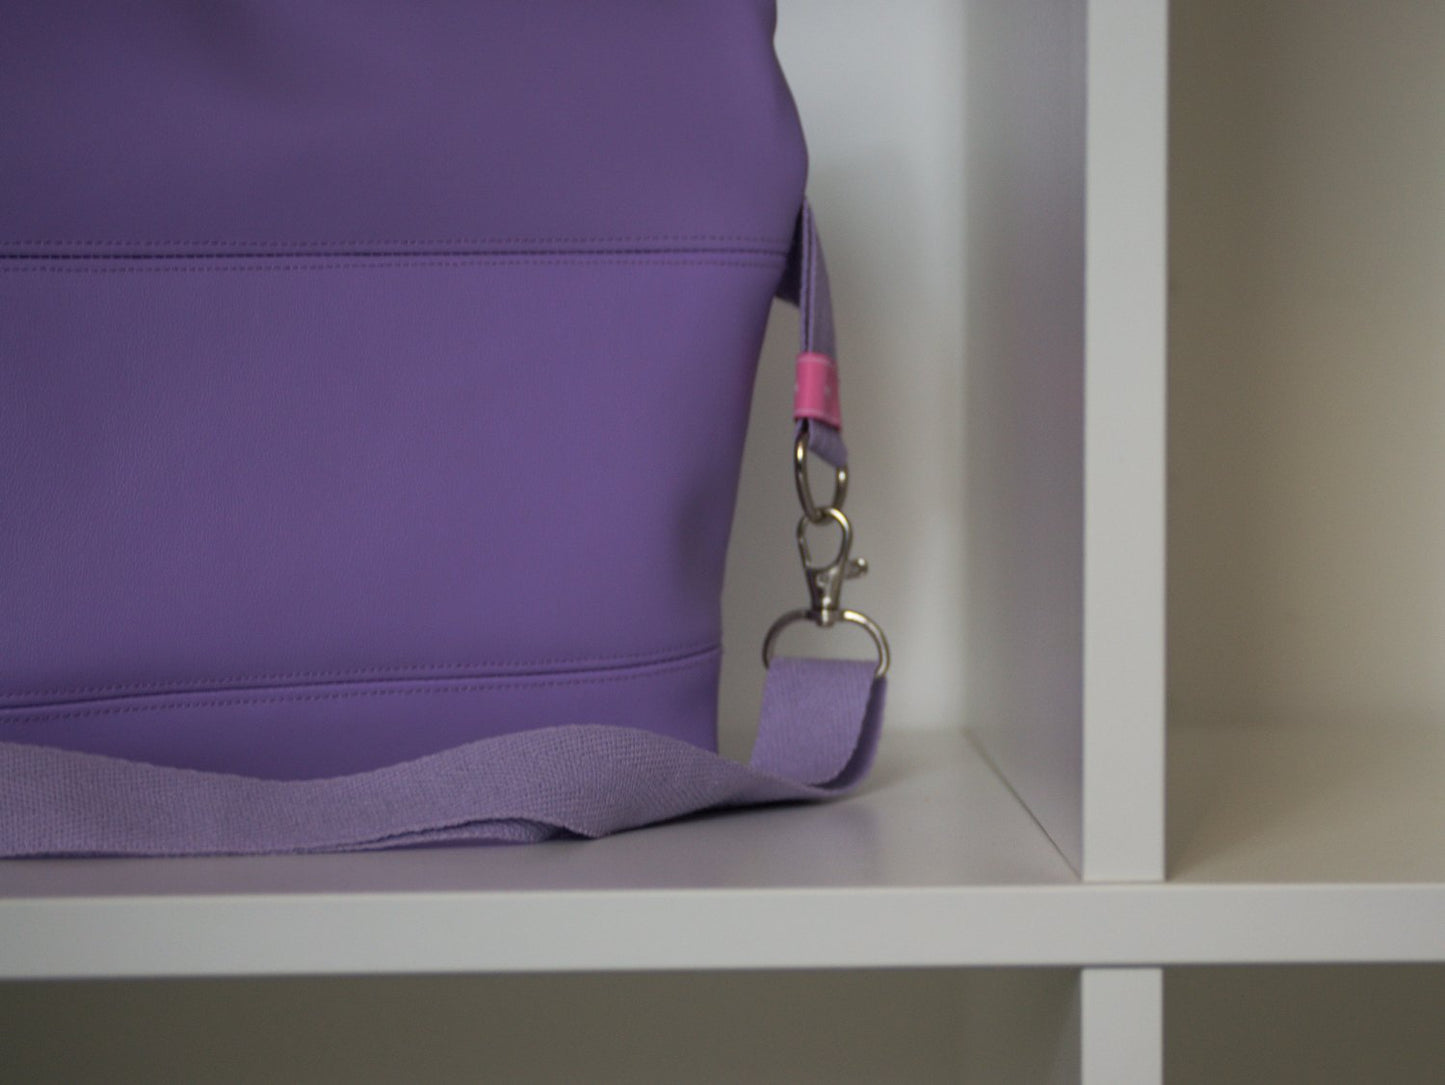 Lilac Bag in Cactus Leather